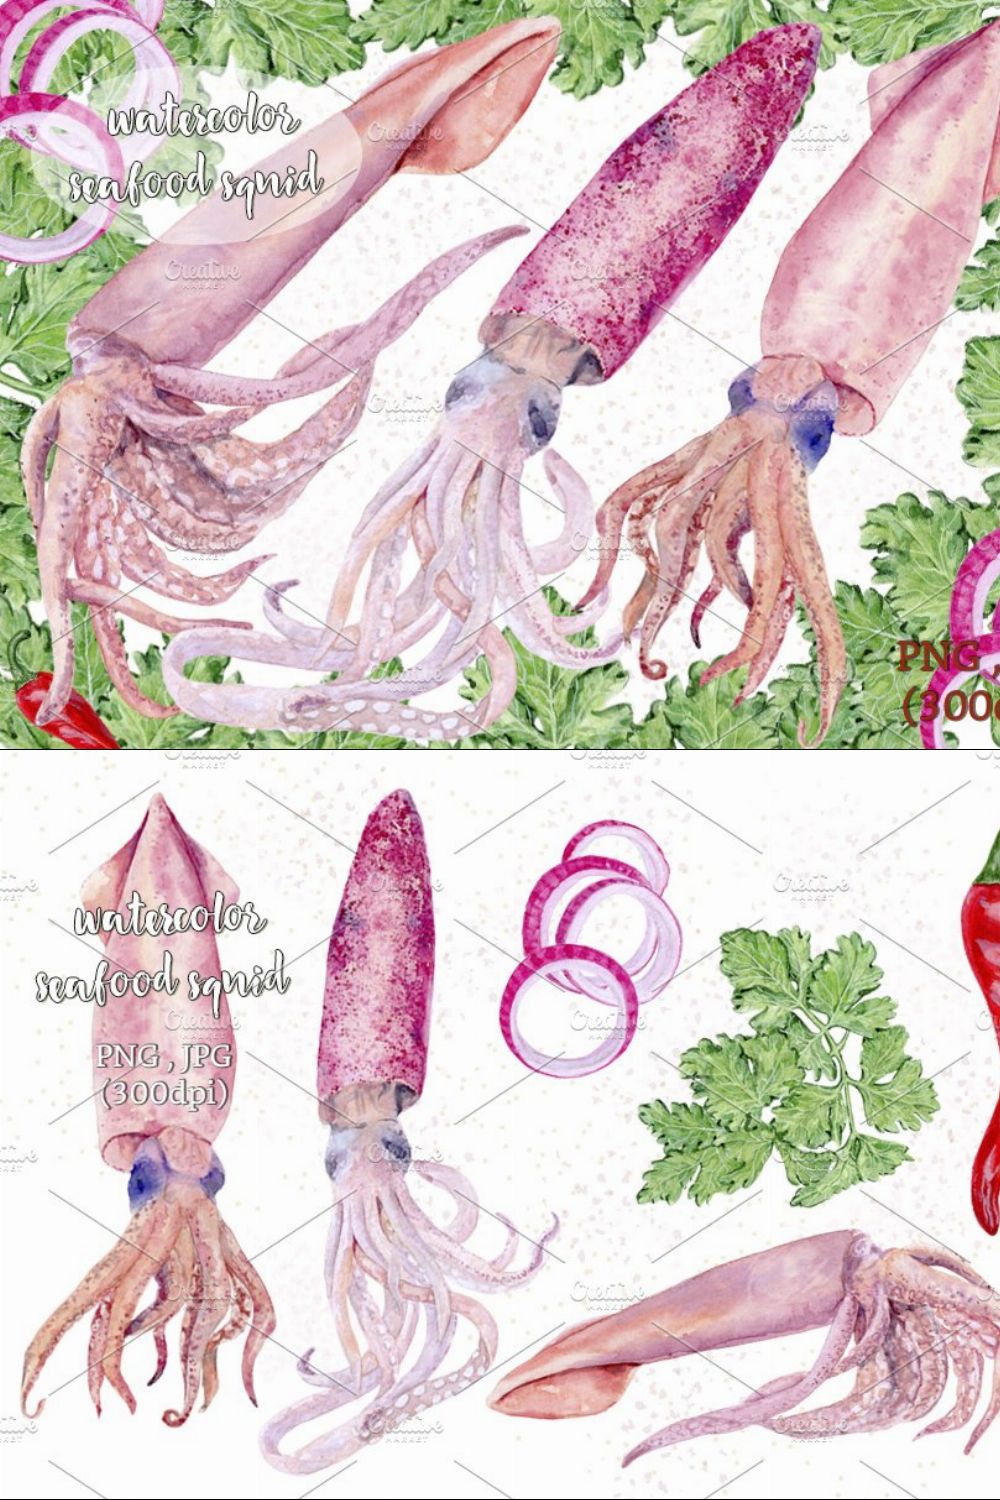 seafood squid watercolor pinterest preview image.